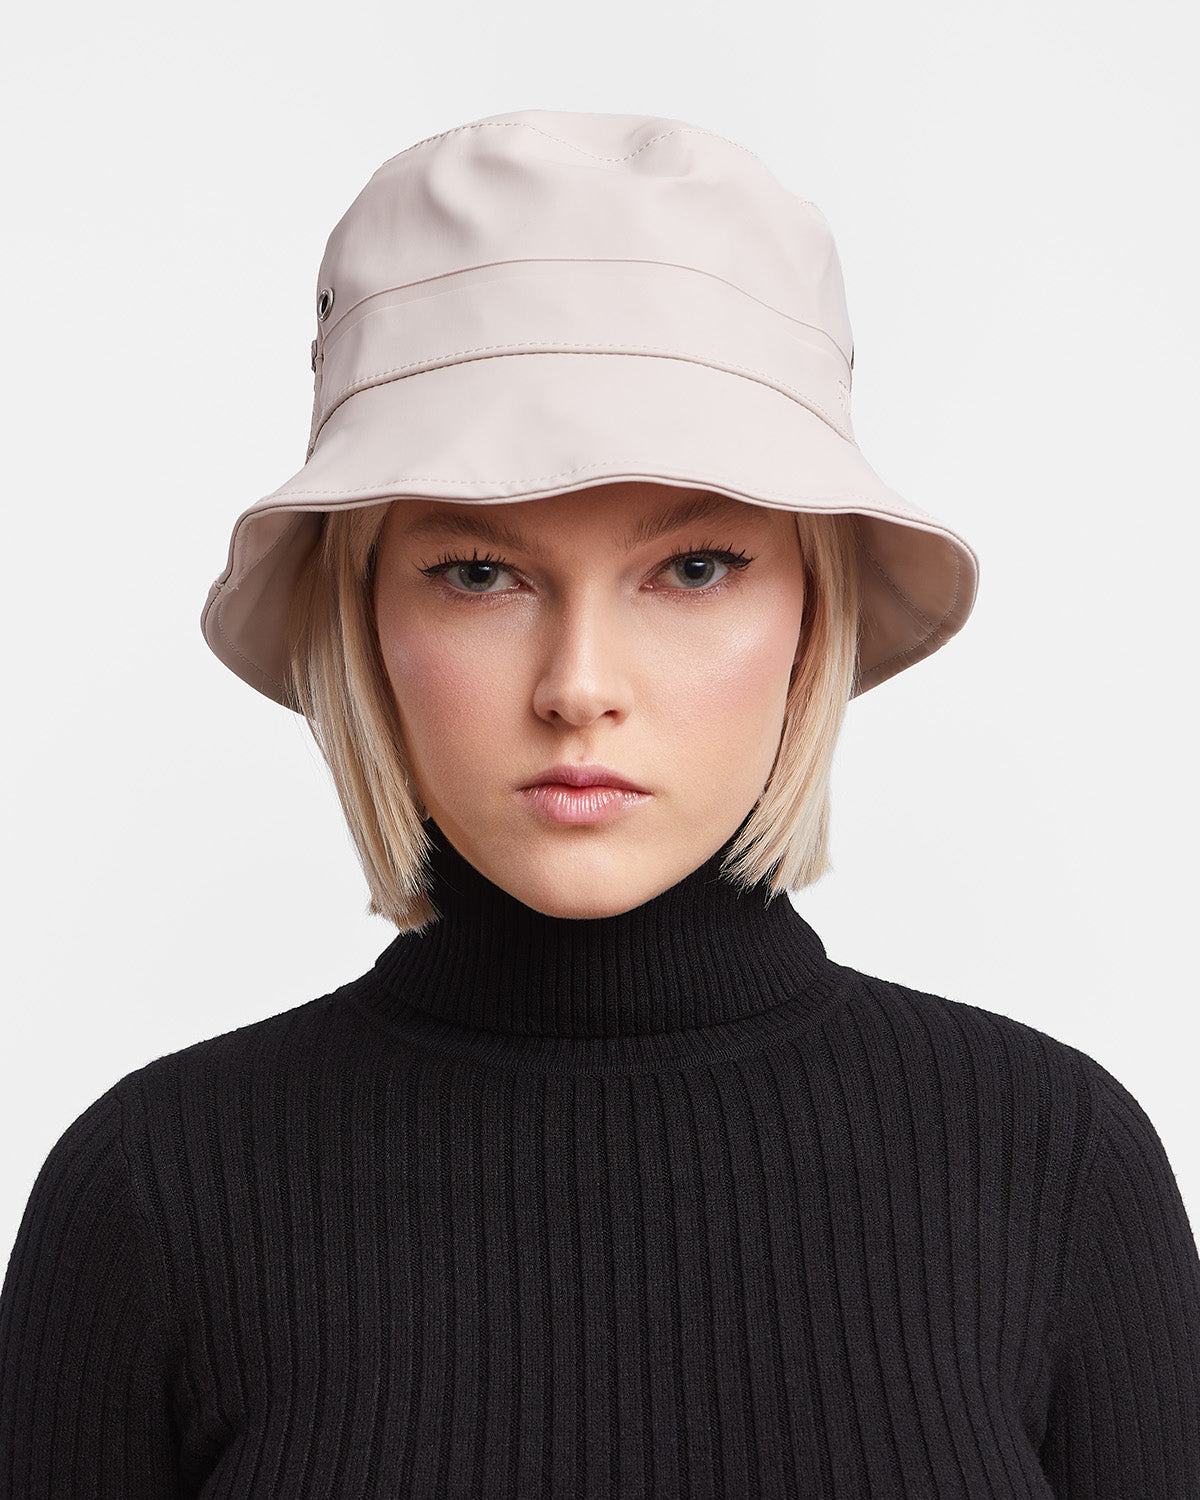 A woman with a Bucket Hat in color light sand by Stutterheim